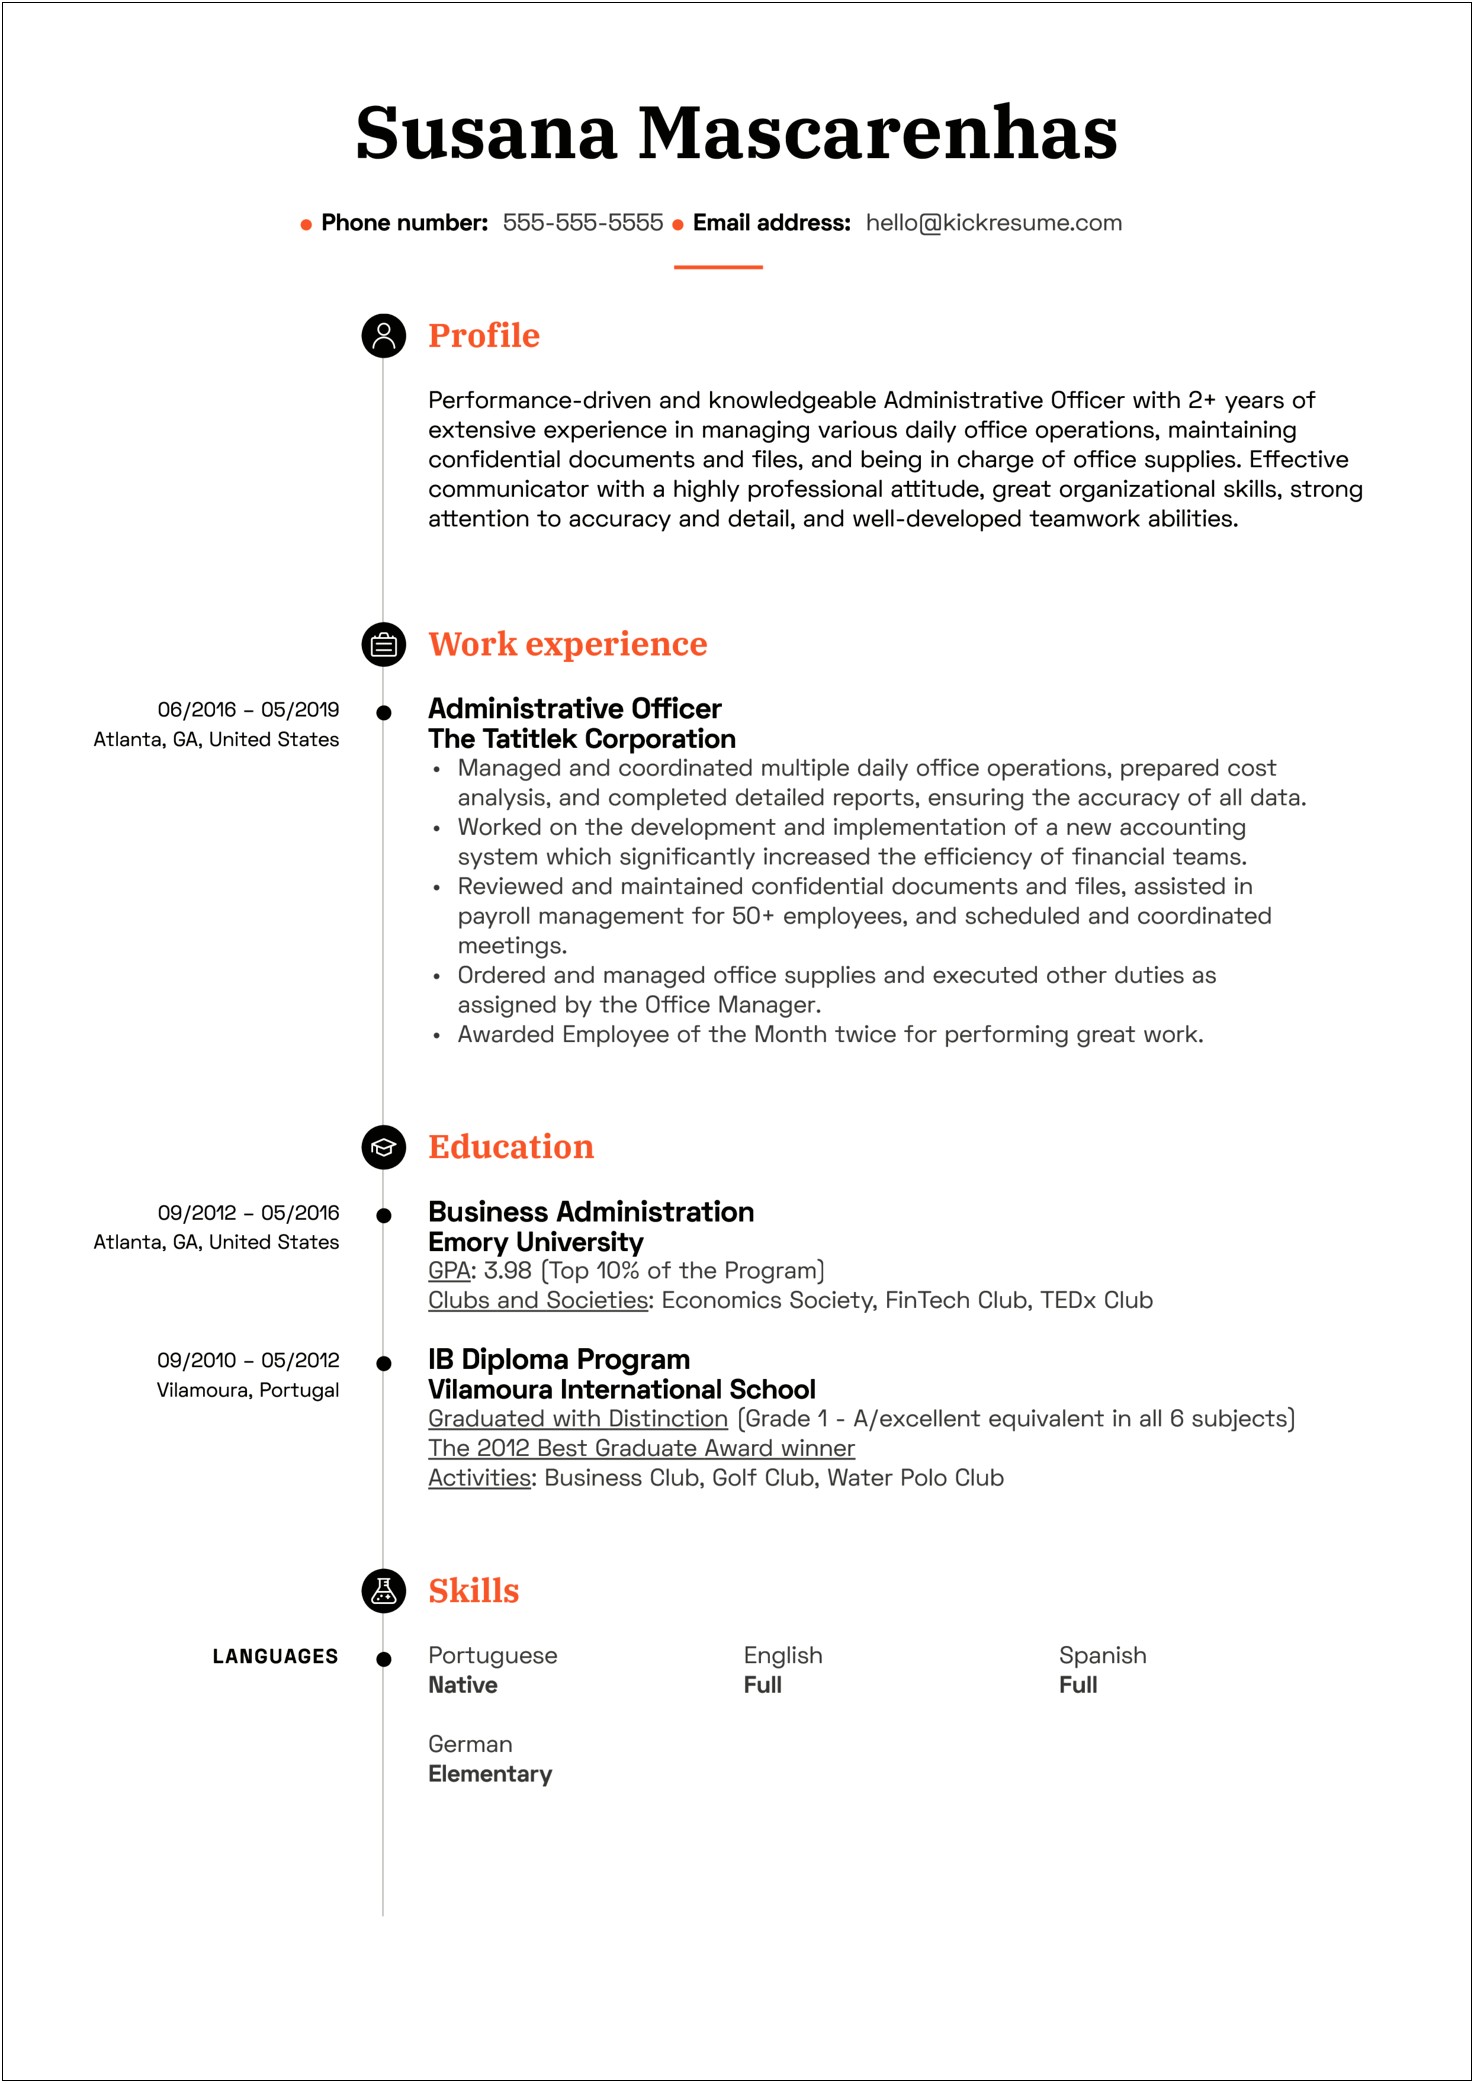 Resume Example With Blurb At Top